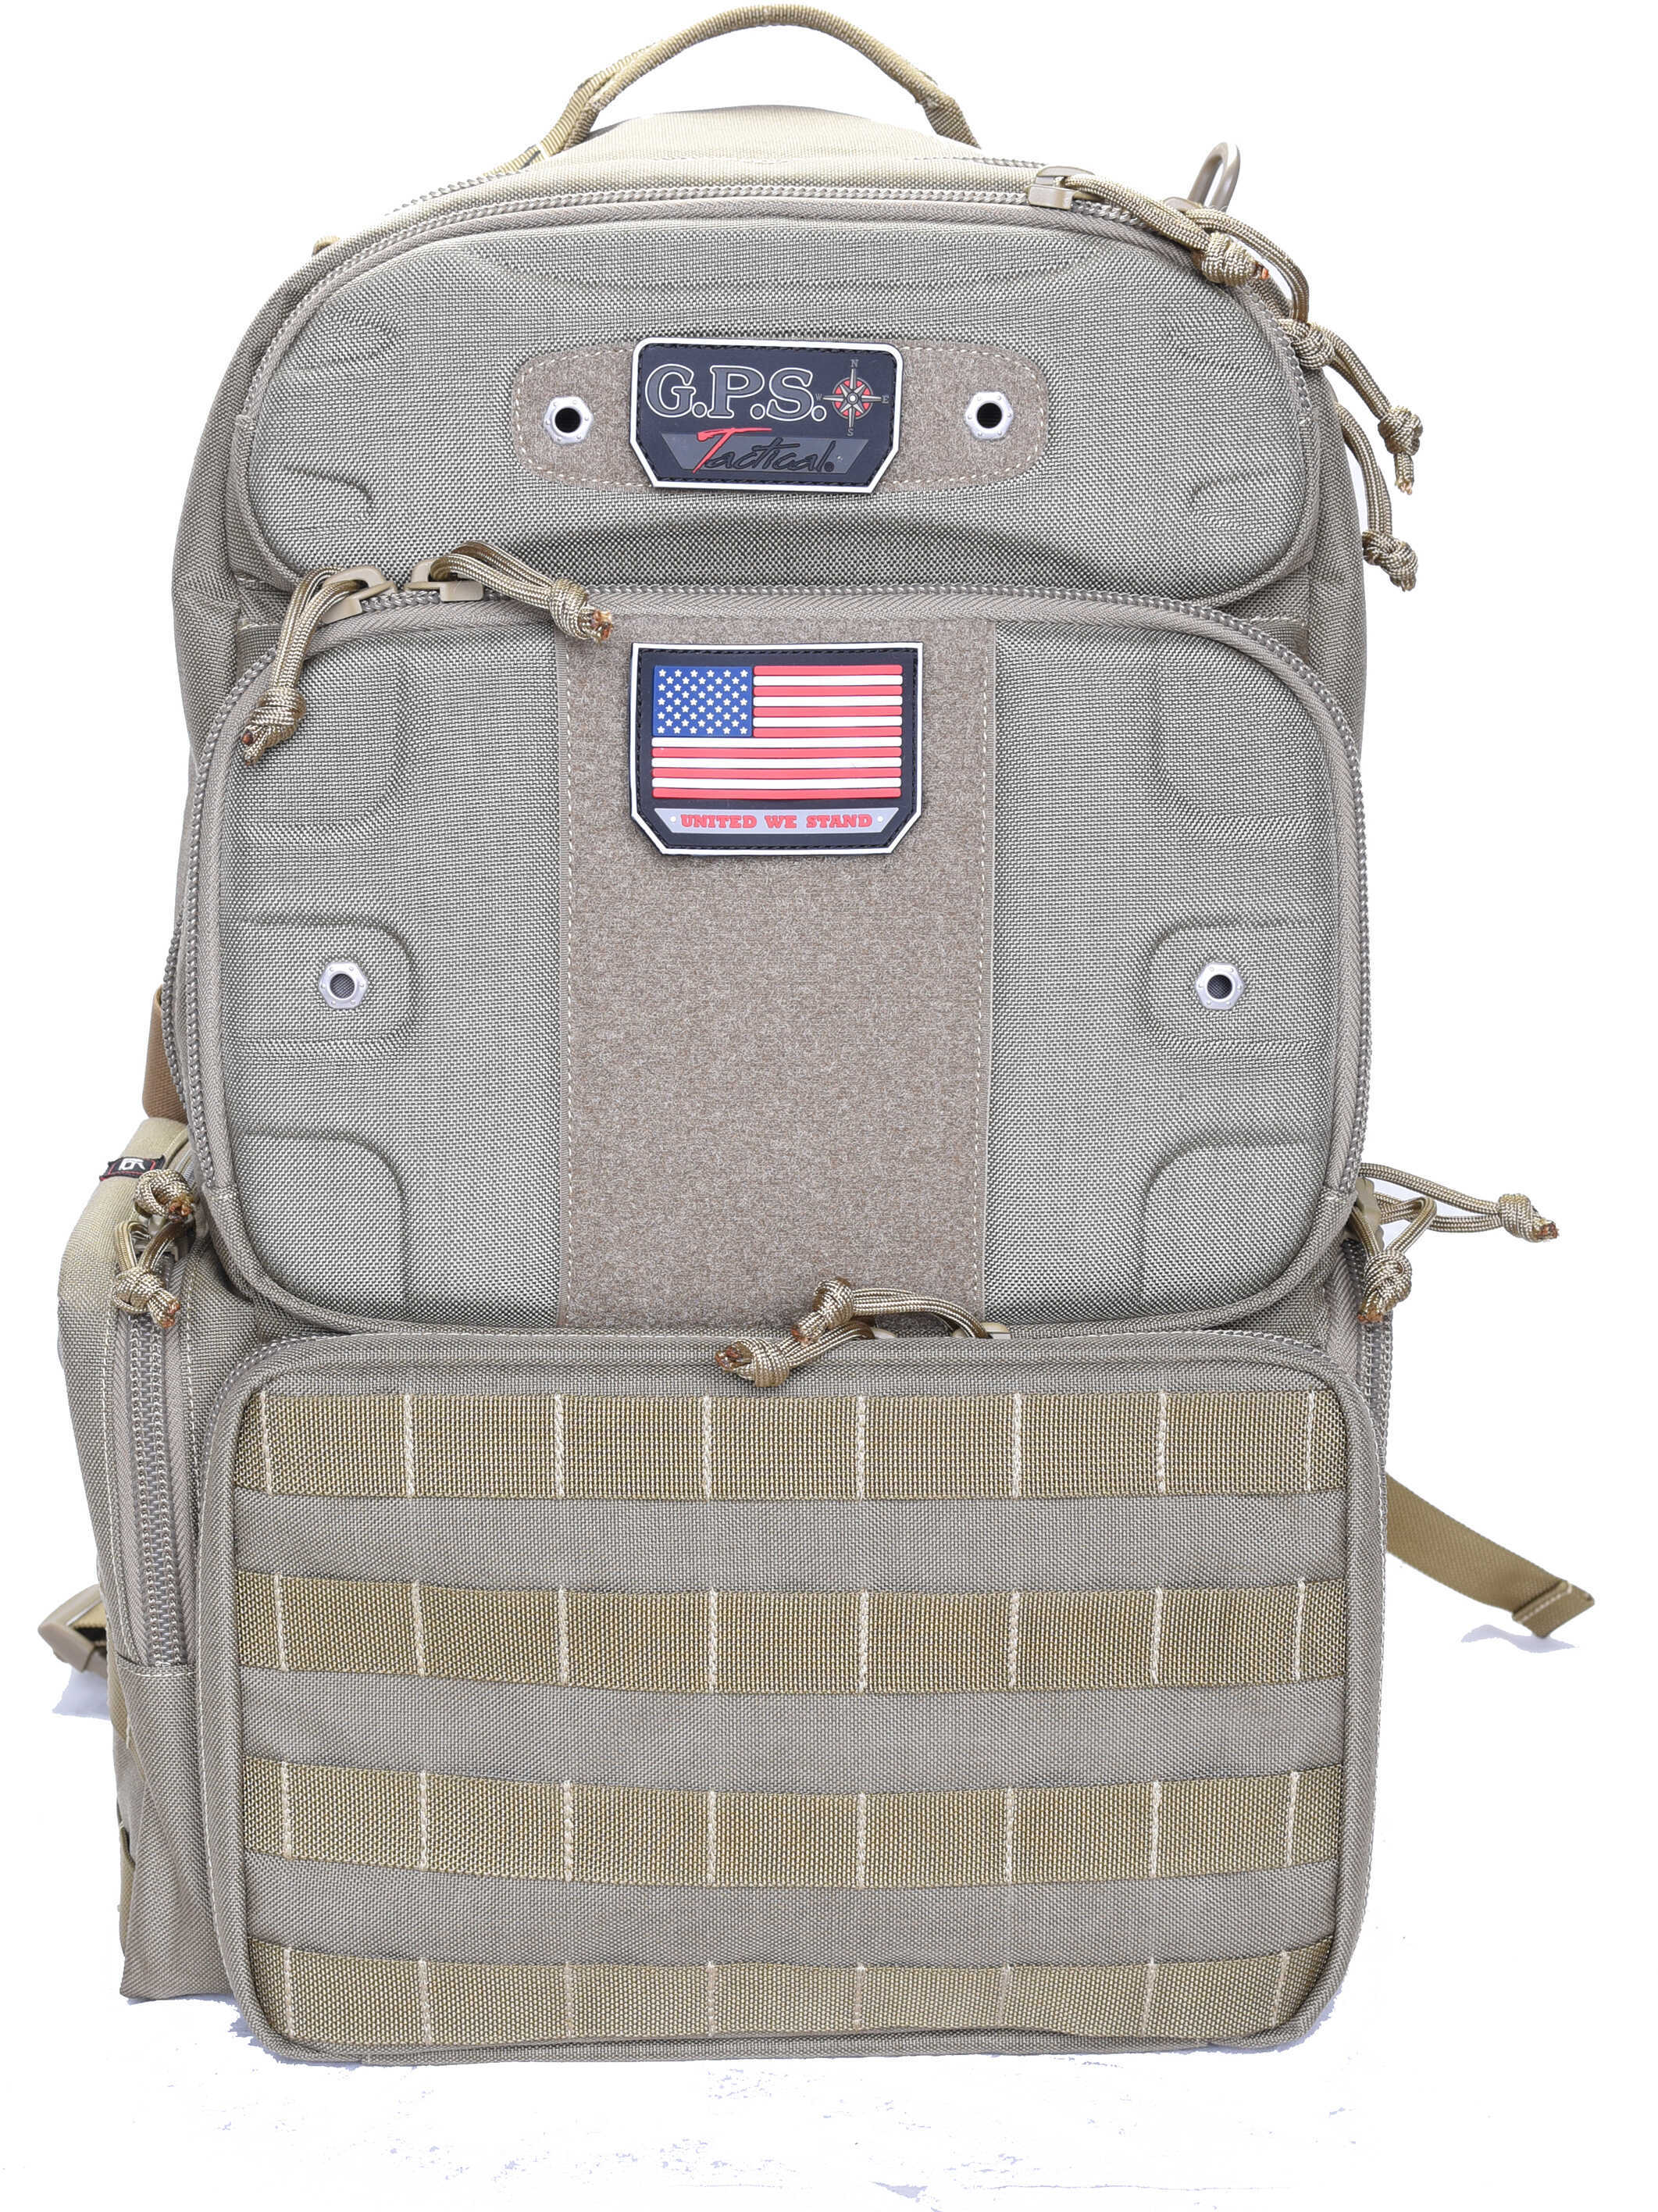 G.P.S. Tactical Range Backpack "Tall" with Waist Strap in Tan